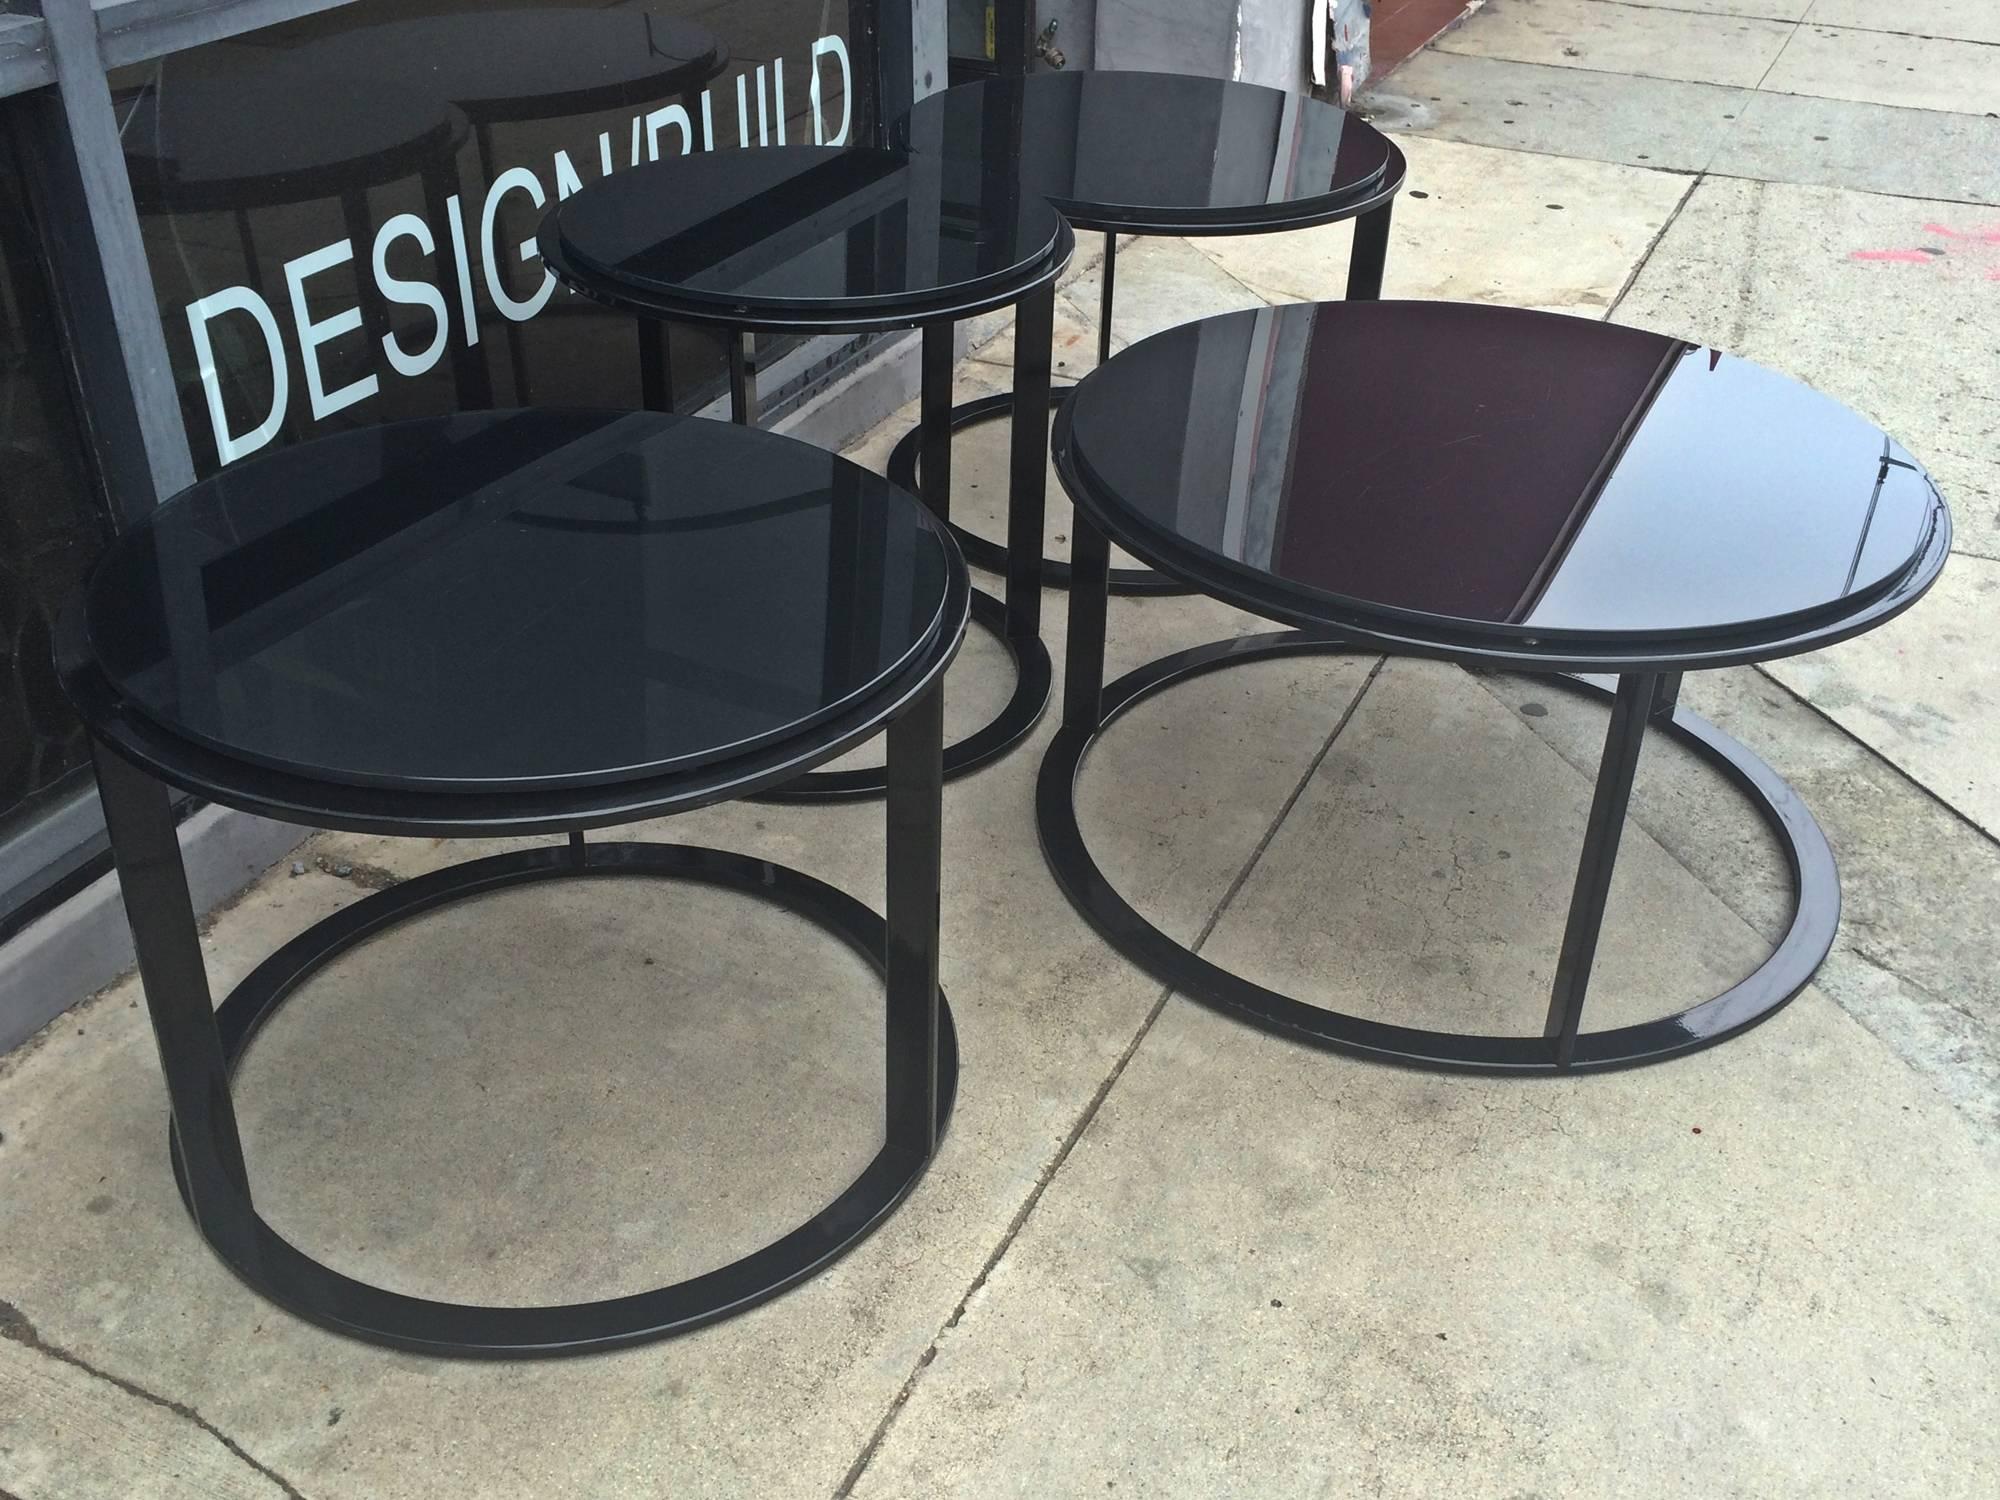 Beautiful set of four tables (one coffee table, two side tables and an additional side table) in black tubular steel and reverse painted black glass tops designed by Antonio Citterio and manufactured by B&B Italia.

These tables can be used